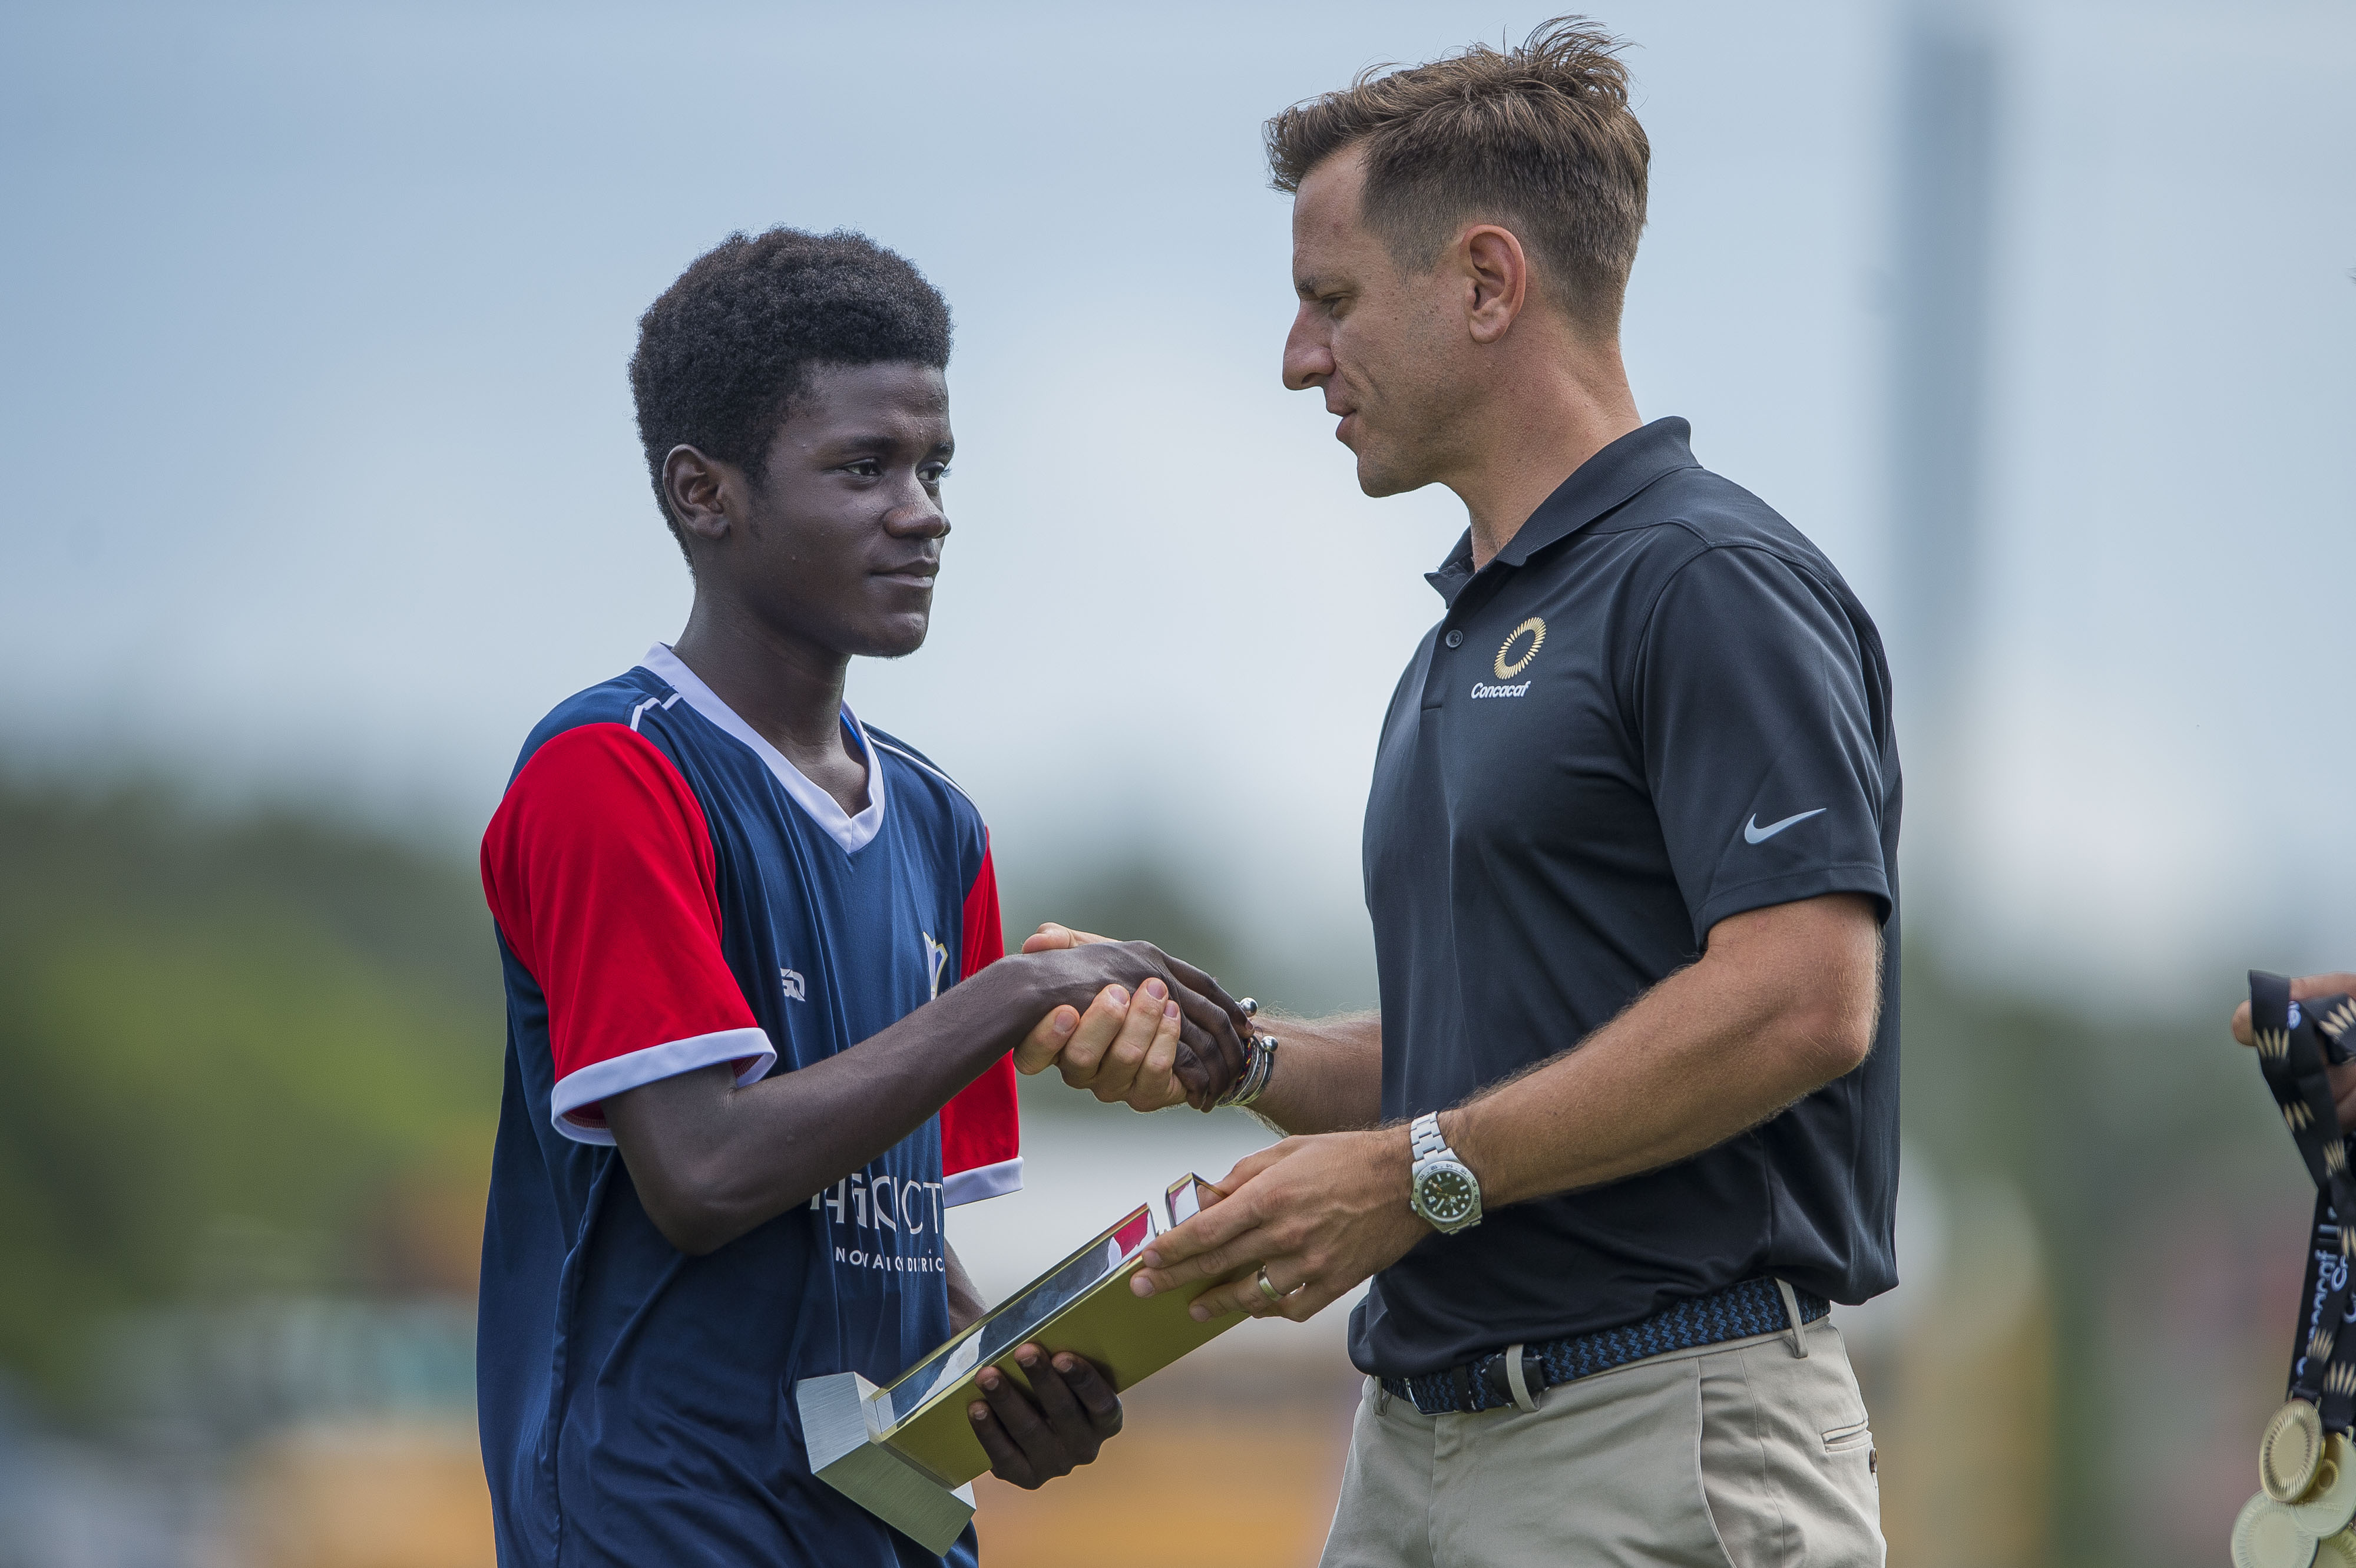 Concacaf announces awards for 2019 Boys Under-15 Championship